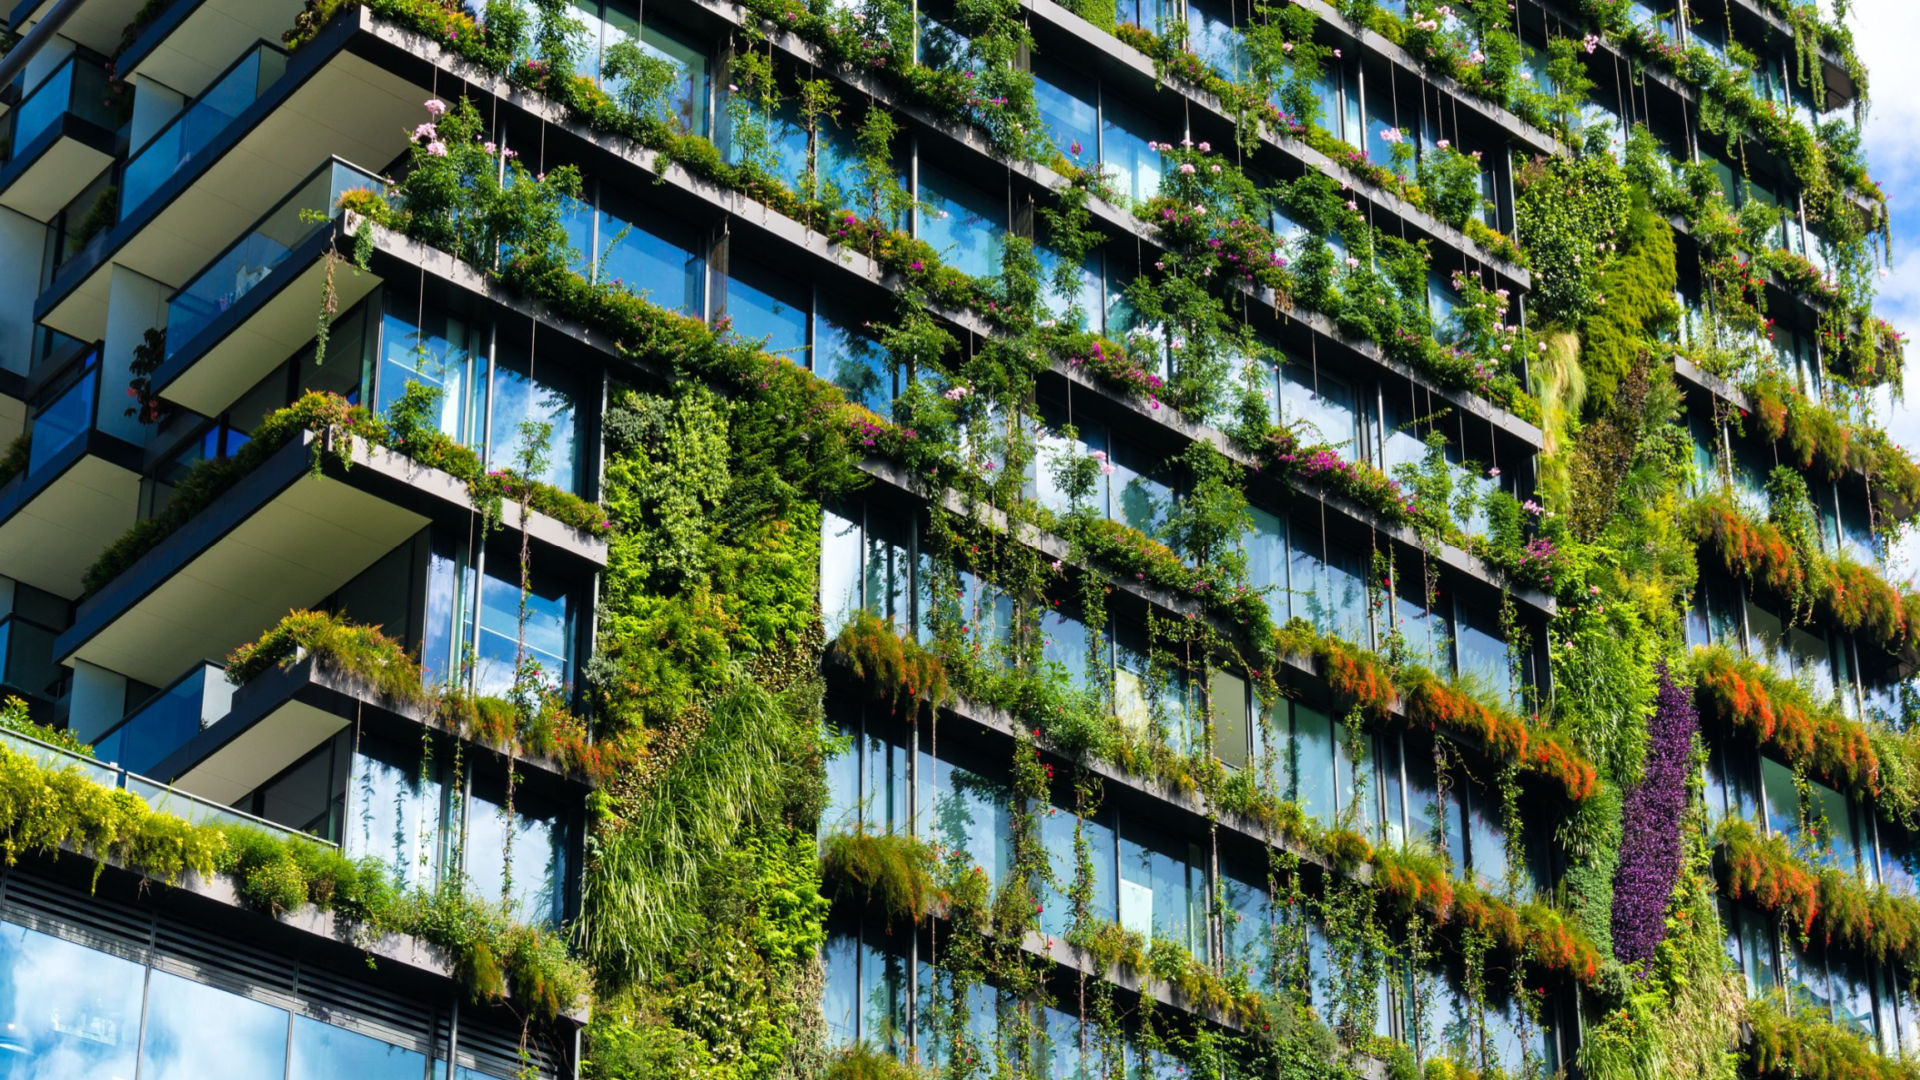 green wall of plants on building